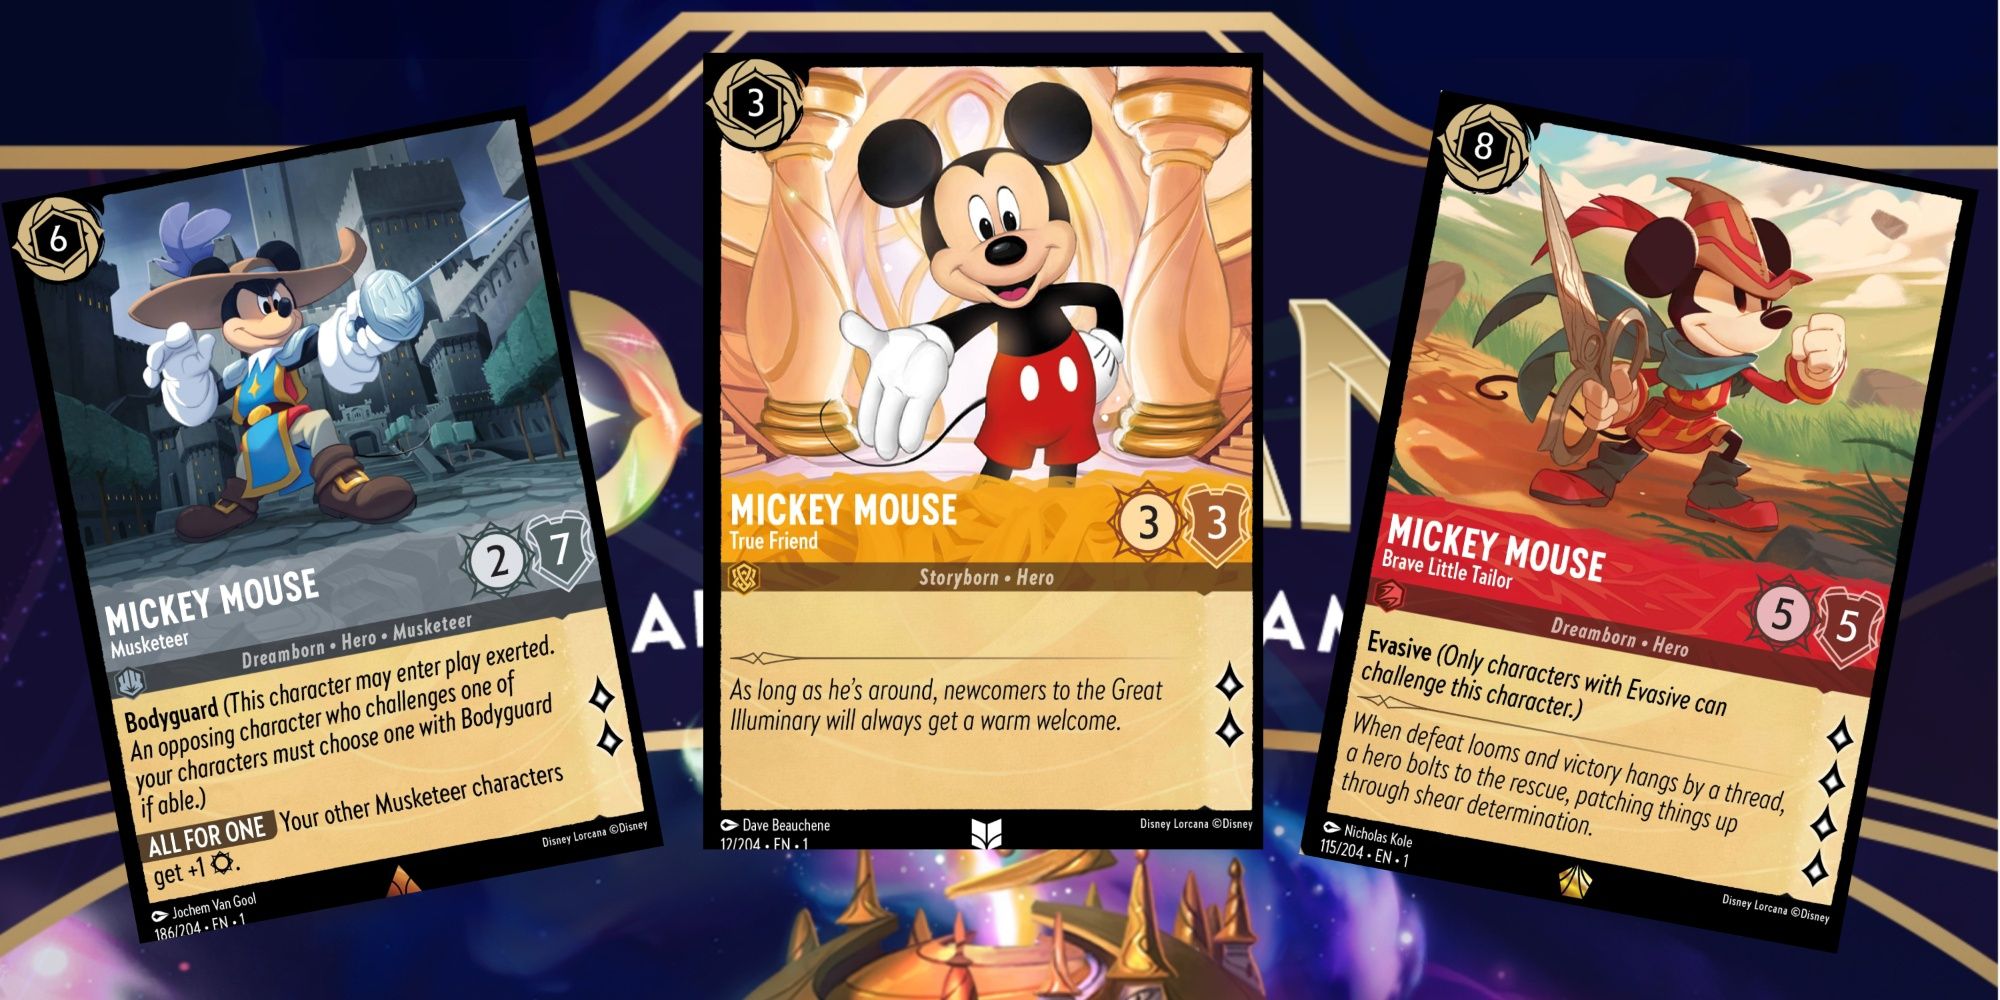 All D23 Disney Lorcana Cards (& How Much They're Worth)